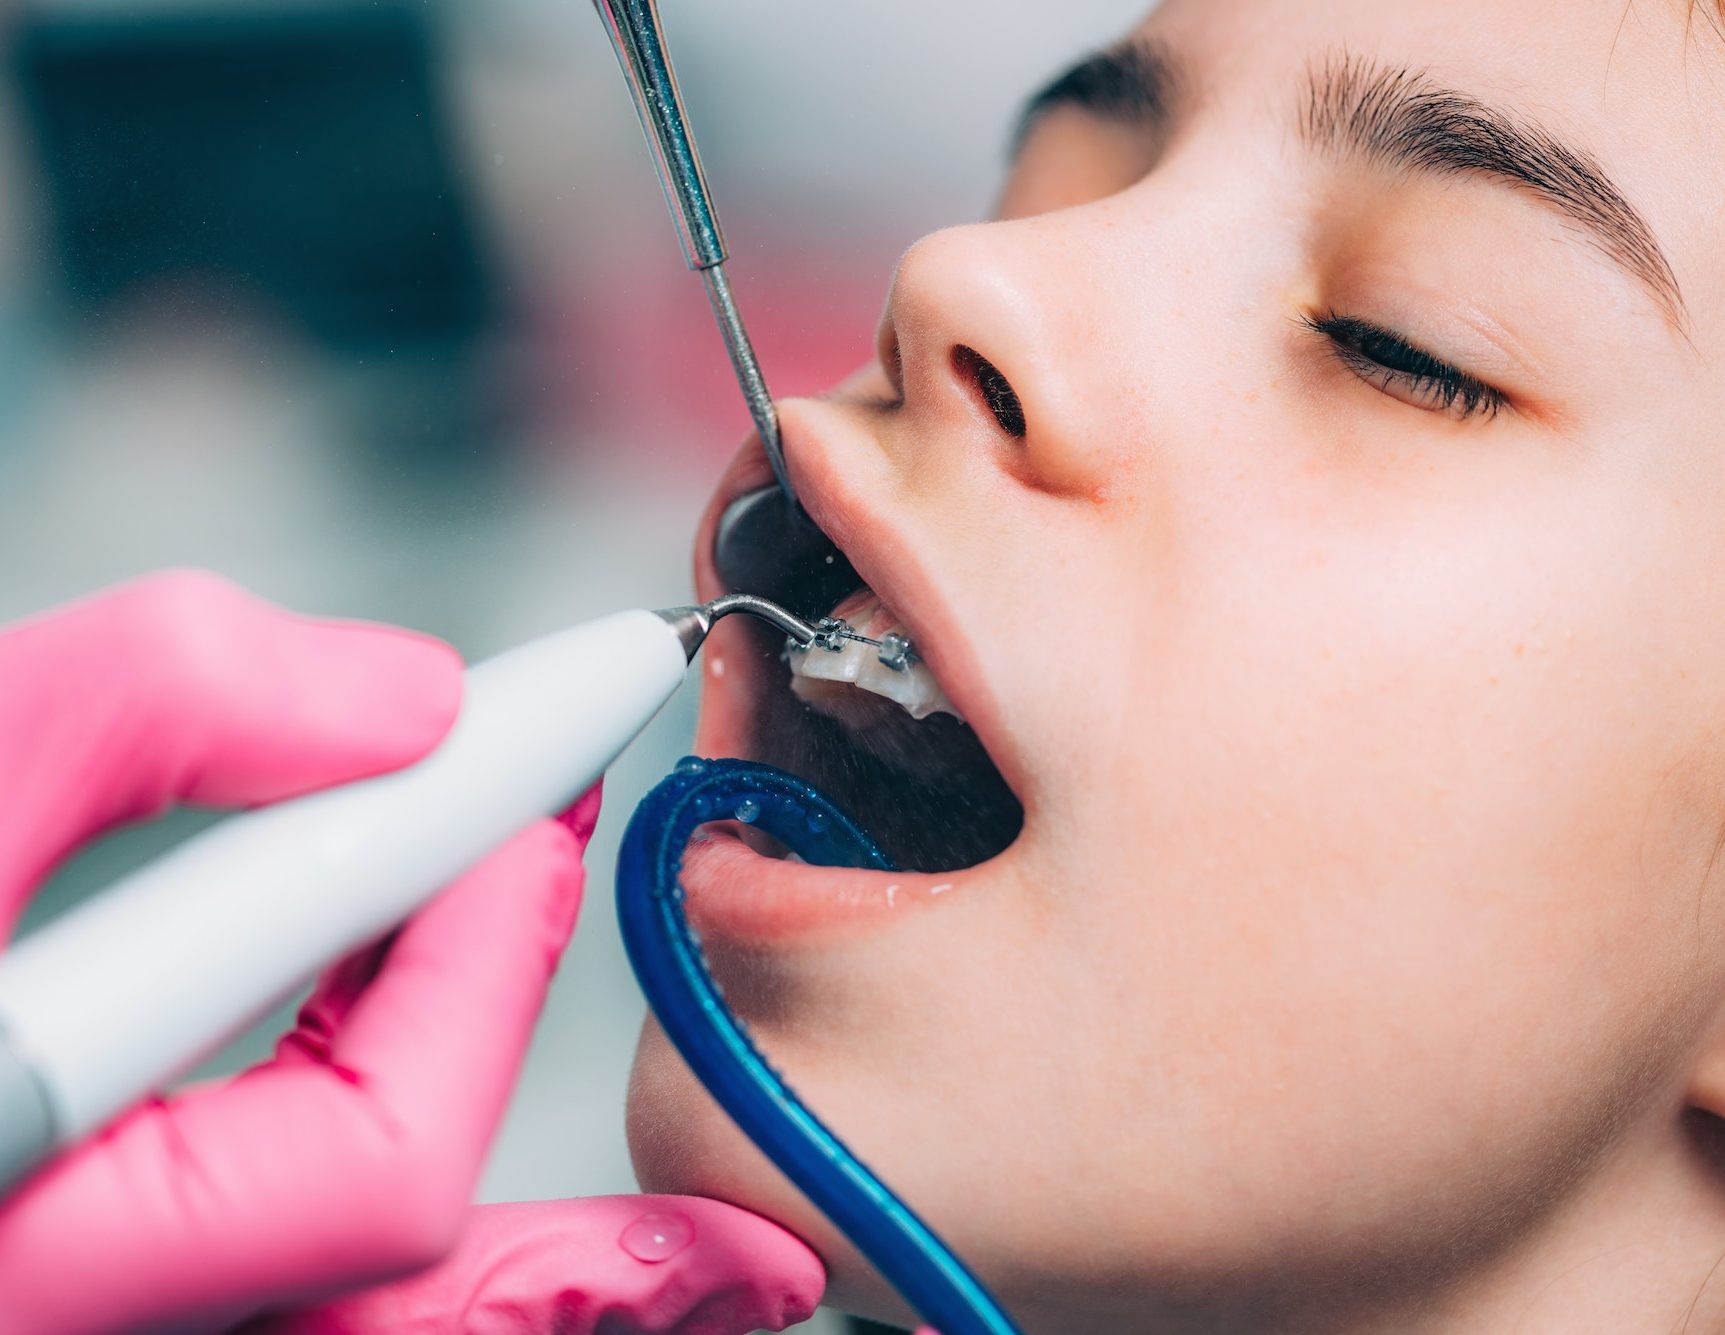 Orthodontist cleaning girl’s teeth with dental braces